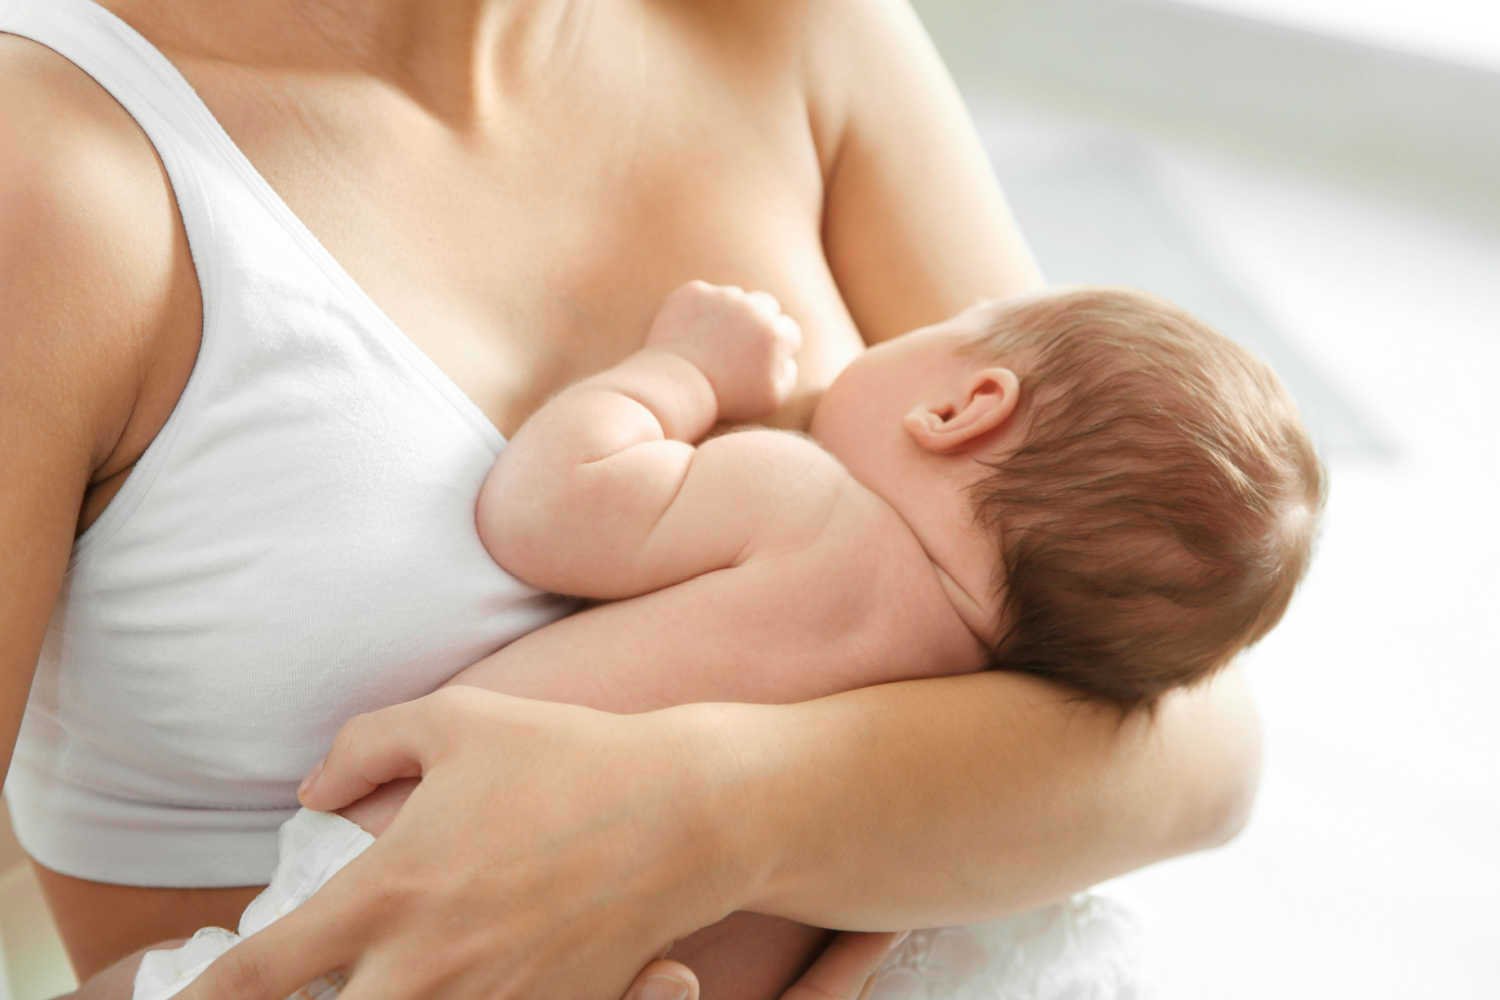 Breast Changes After Breastfeeding – Does it Change and Tips to Care